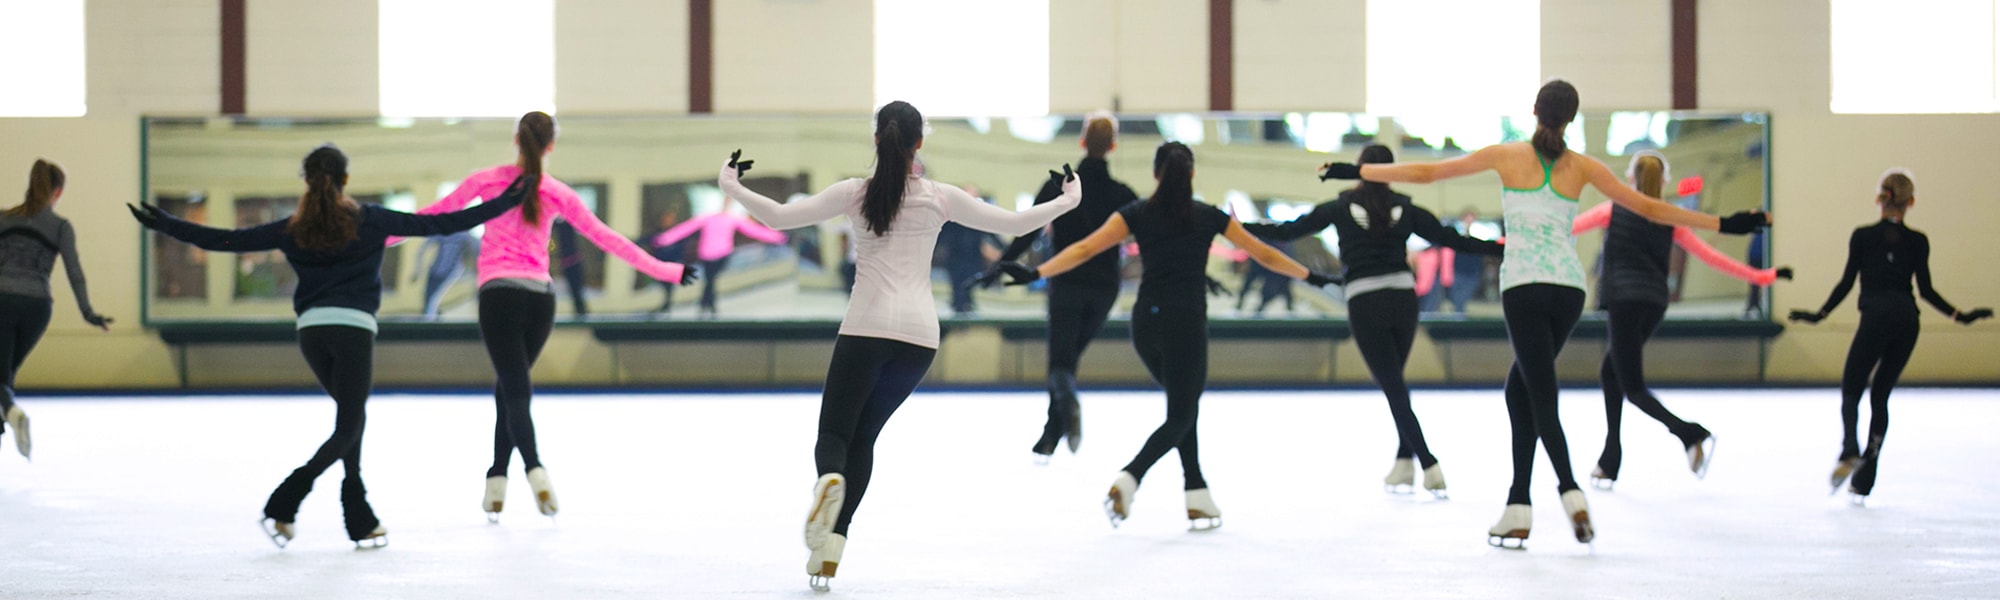 Skaters in a class at the Cricket Club Skating rink